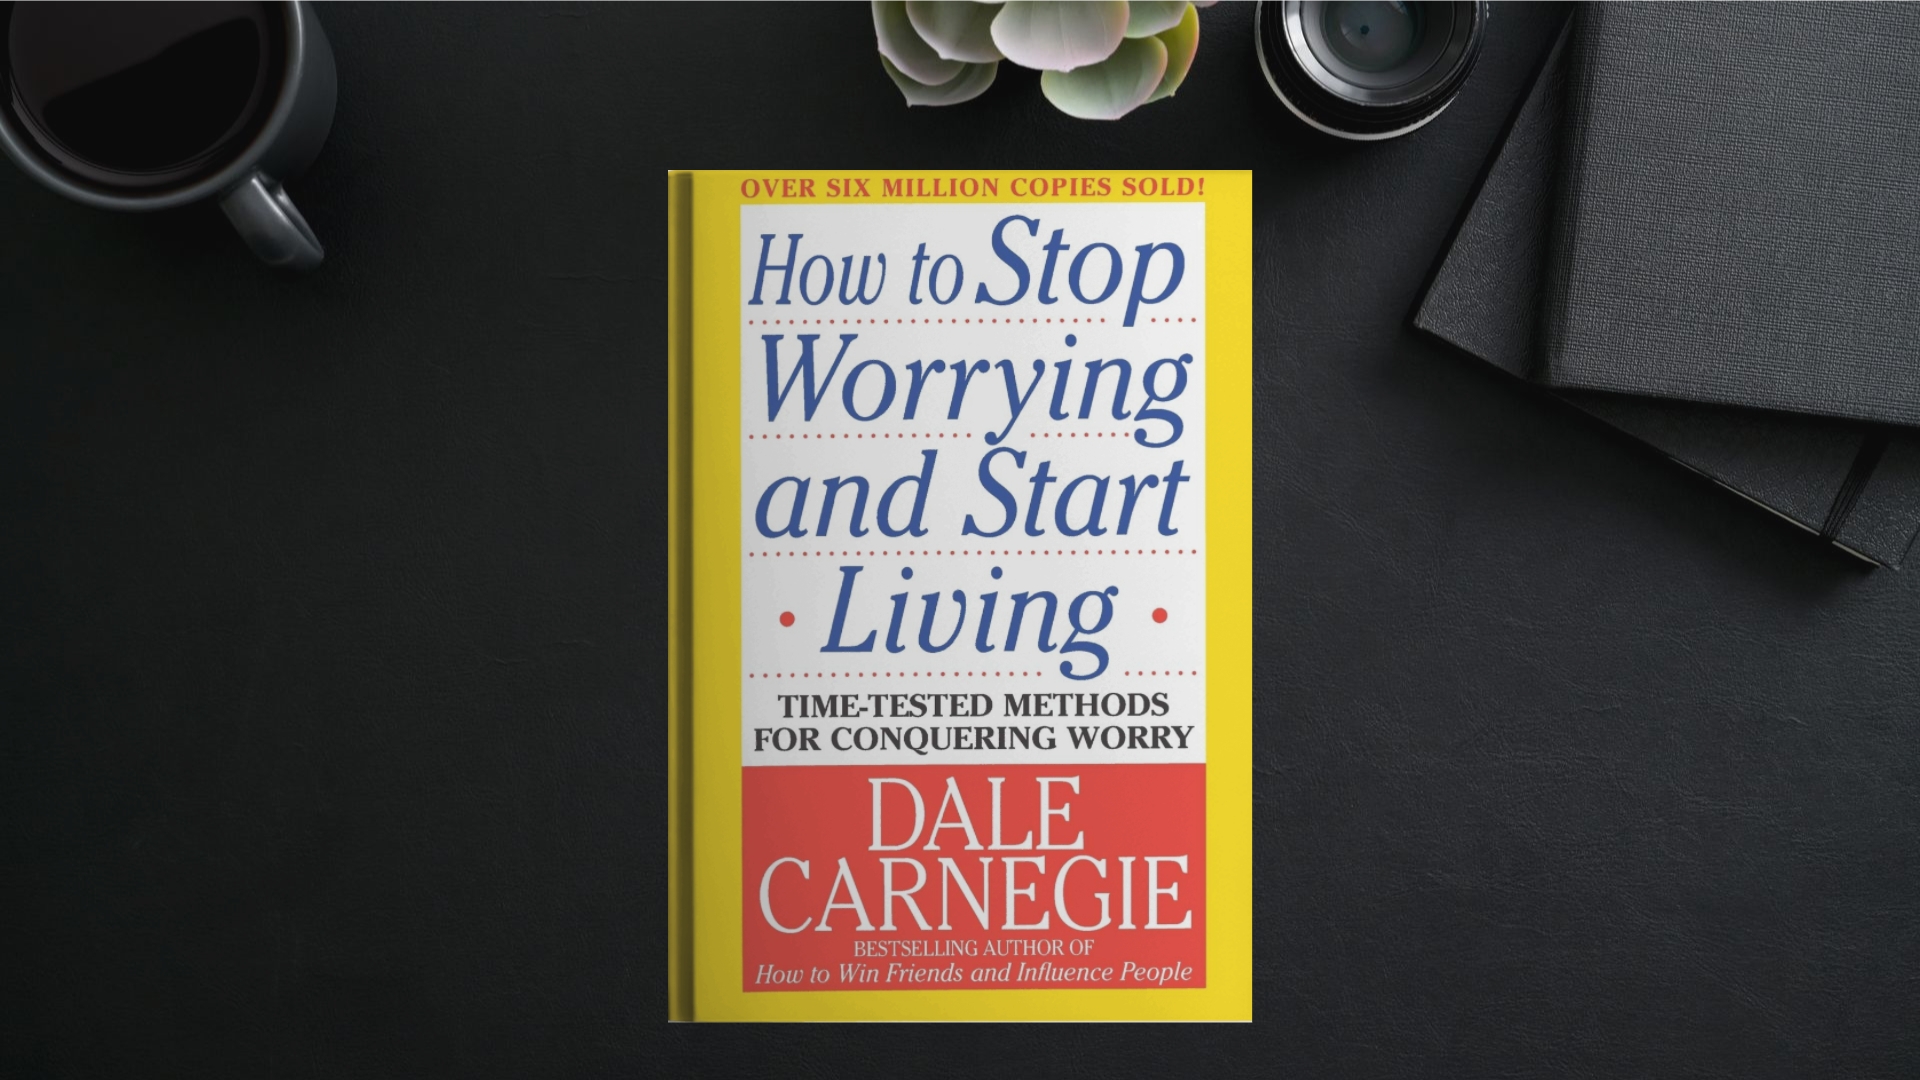 how to stop worrying and start living book